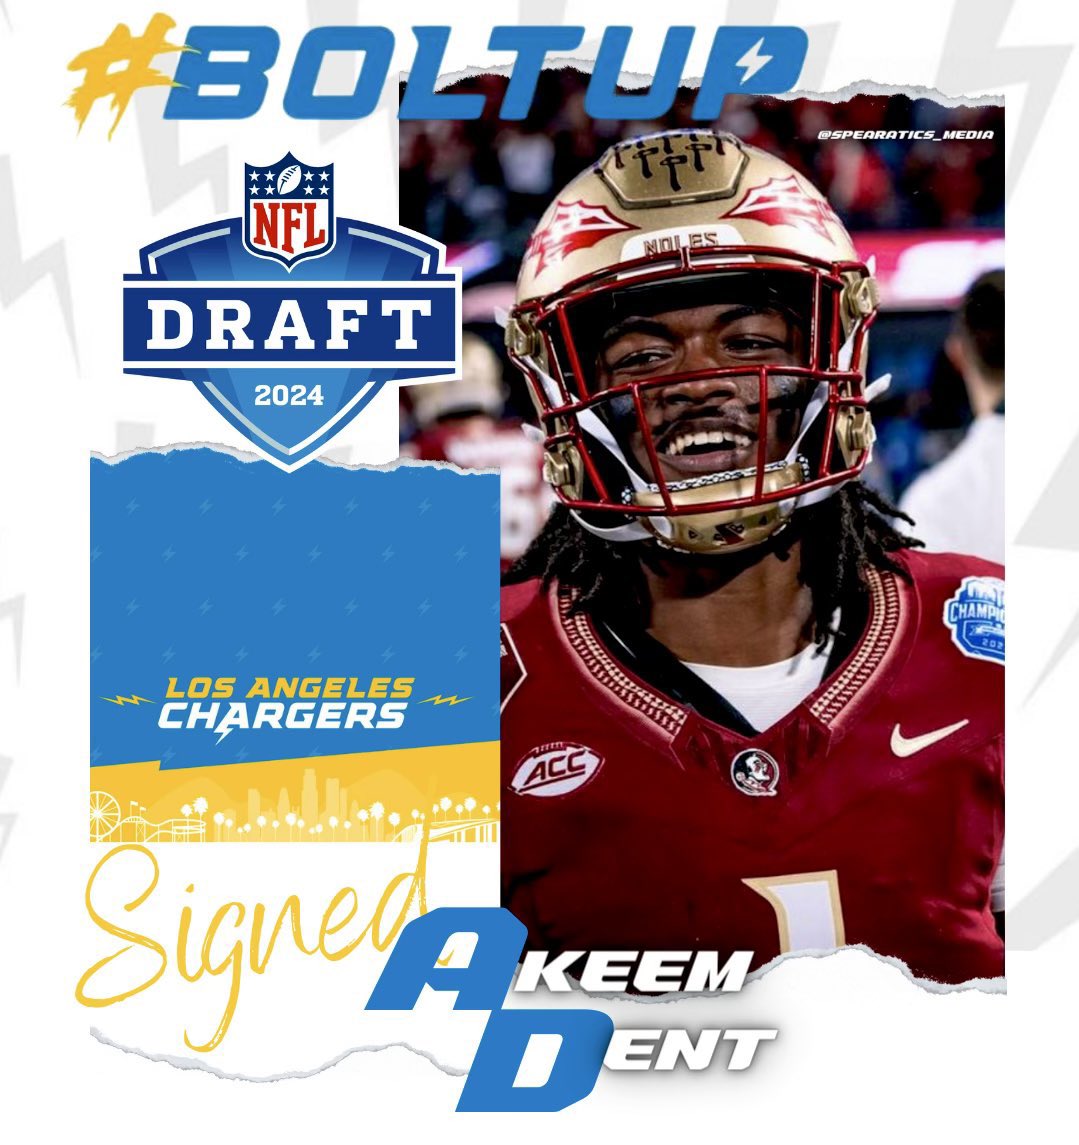 Congrats to our very own Bronco @DoItAllDent103 for signing with the Chargers!! We are so proud of you and your accomplishments. We look forward to watching you on Sundays. @PBCbroncosFBALL